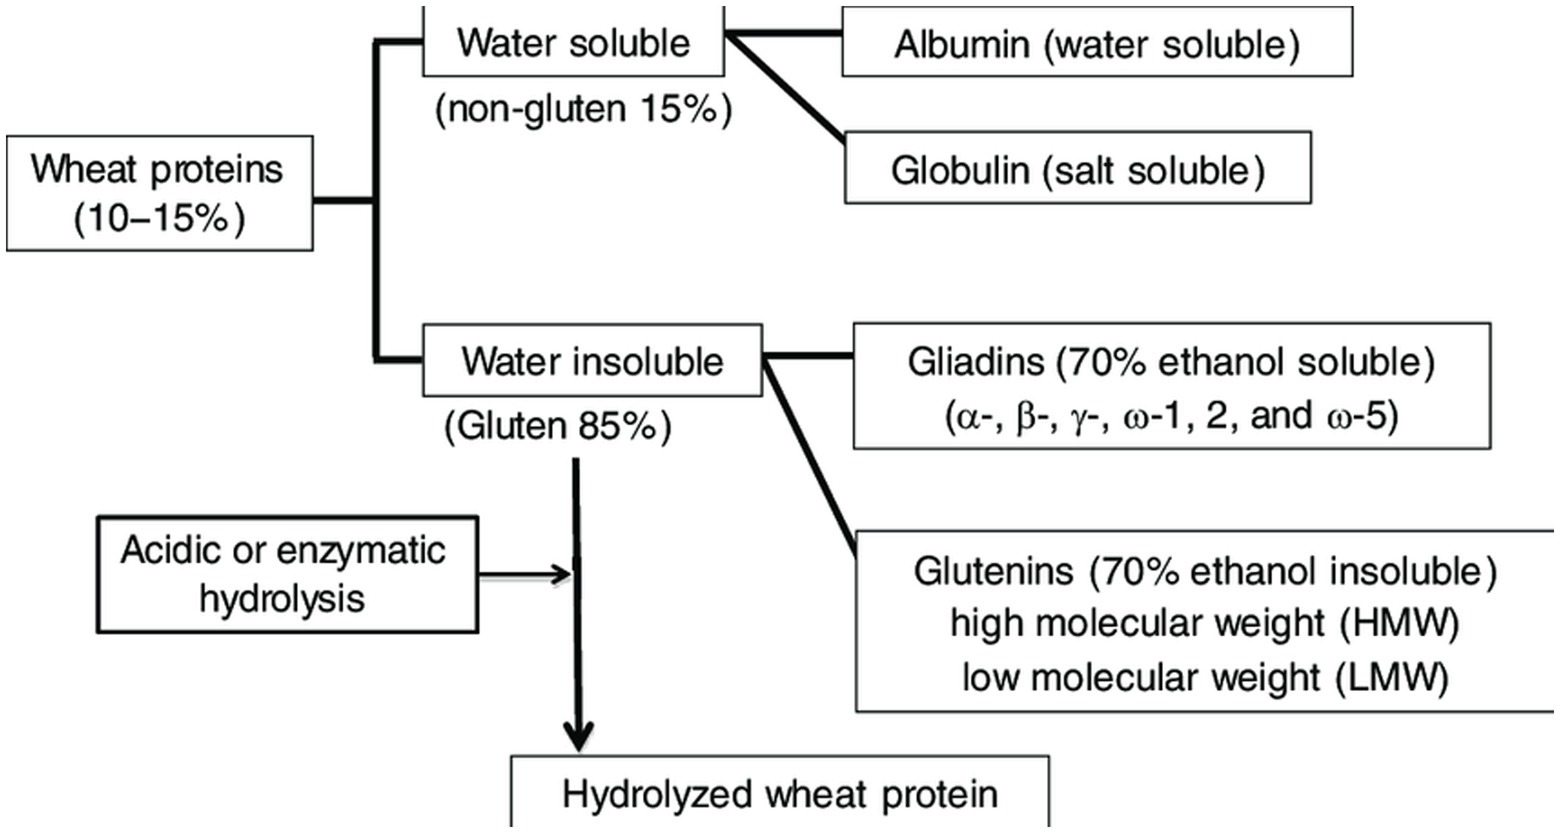 Comparison of water-soluble (WS) proteins of wheat from whole meal and